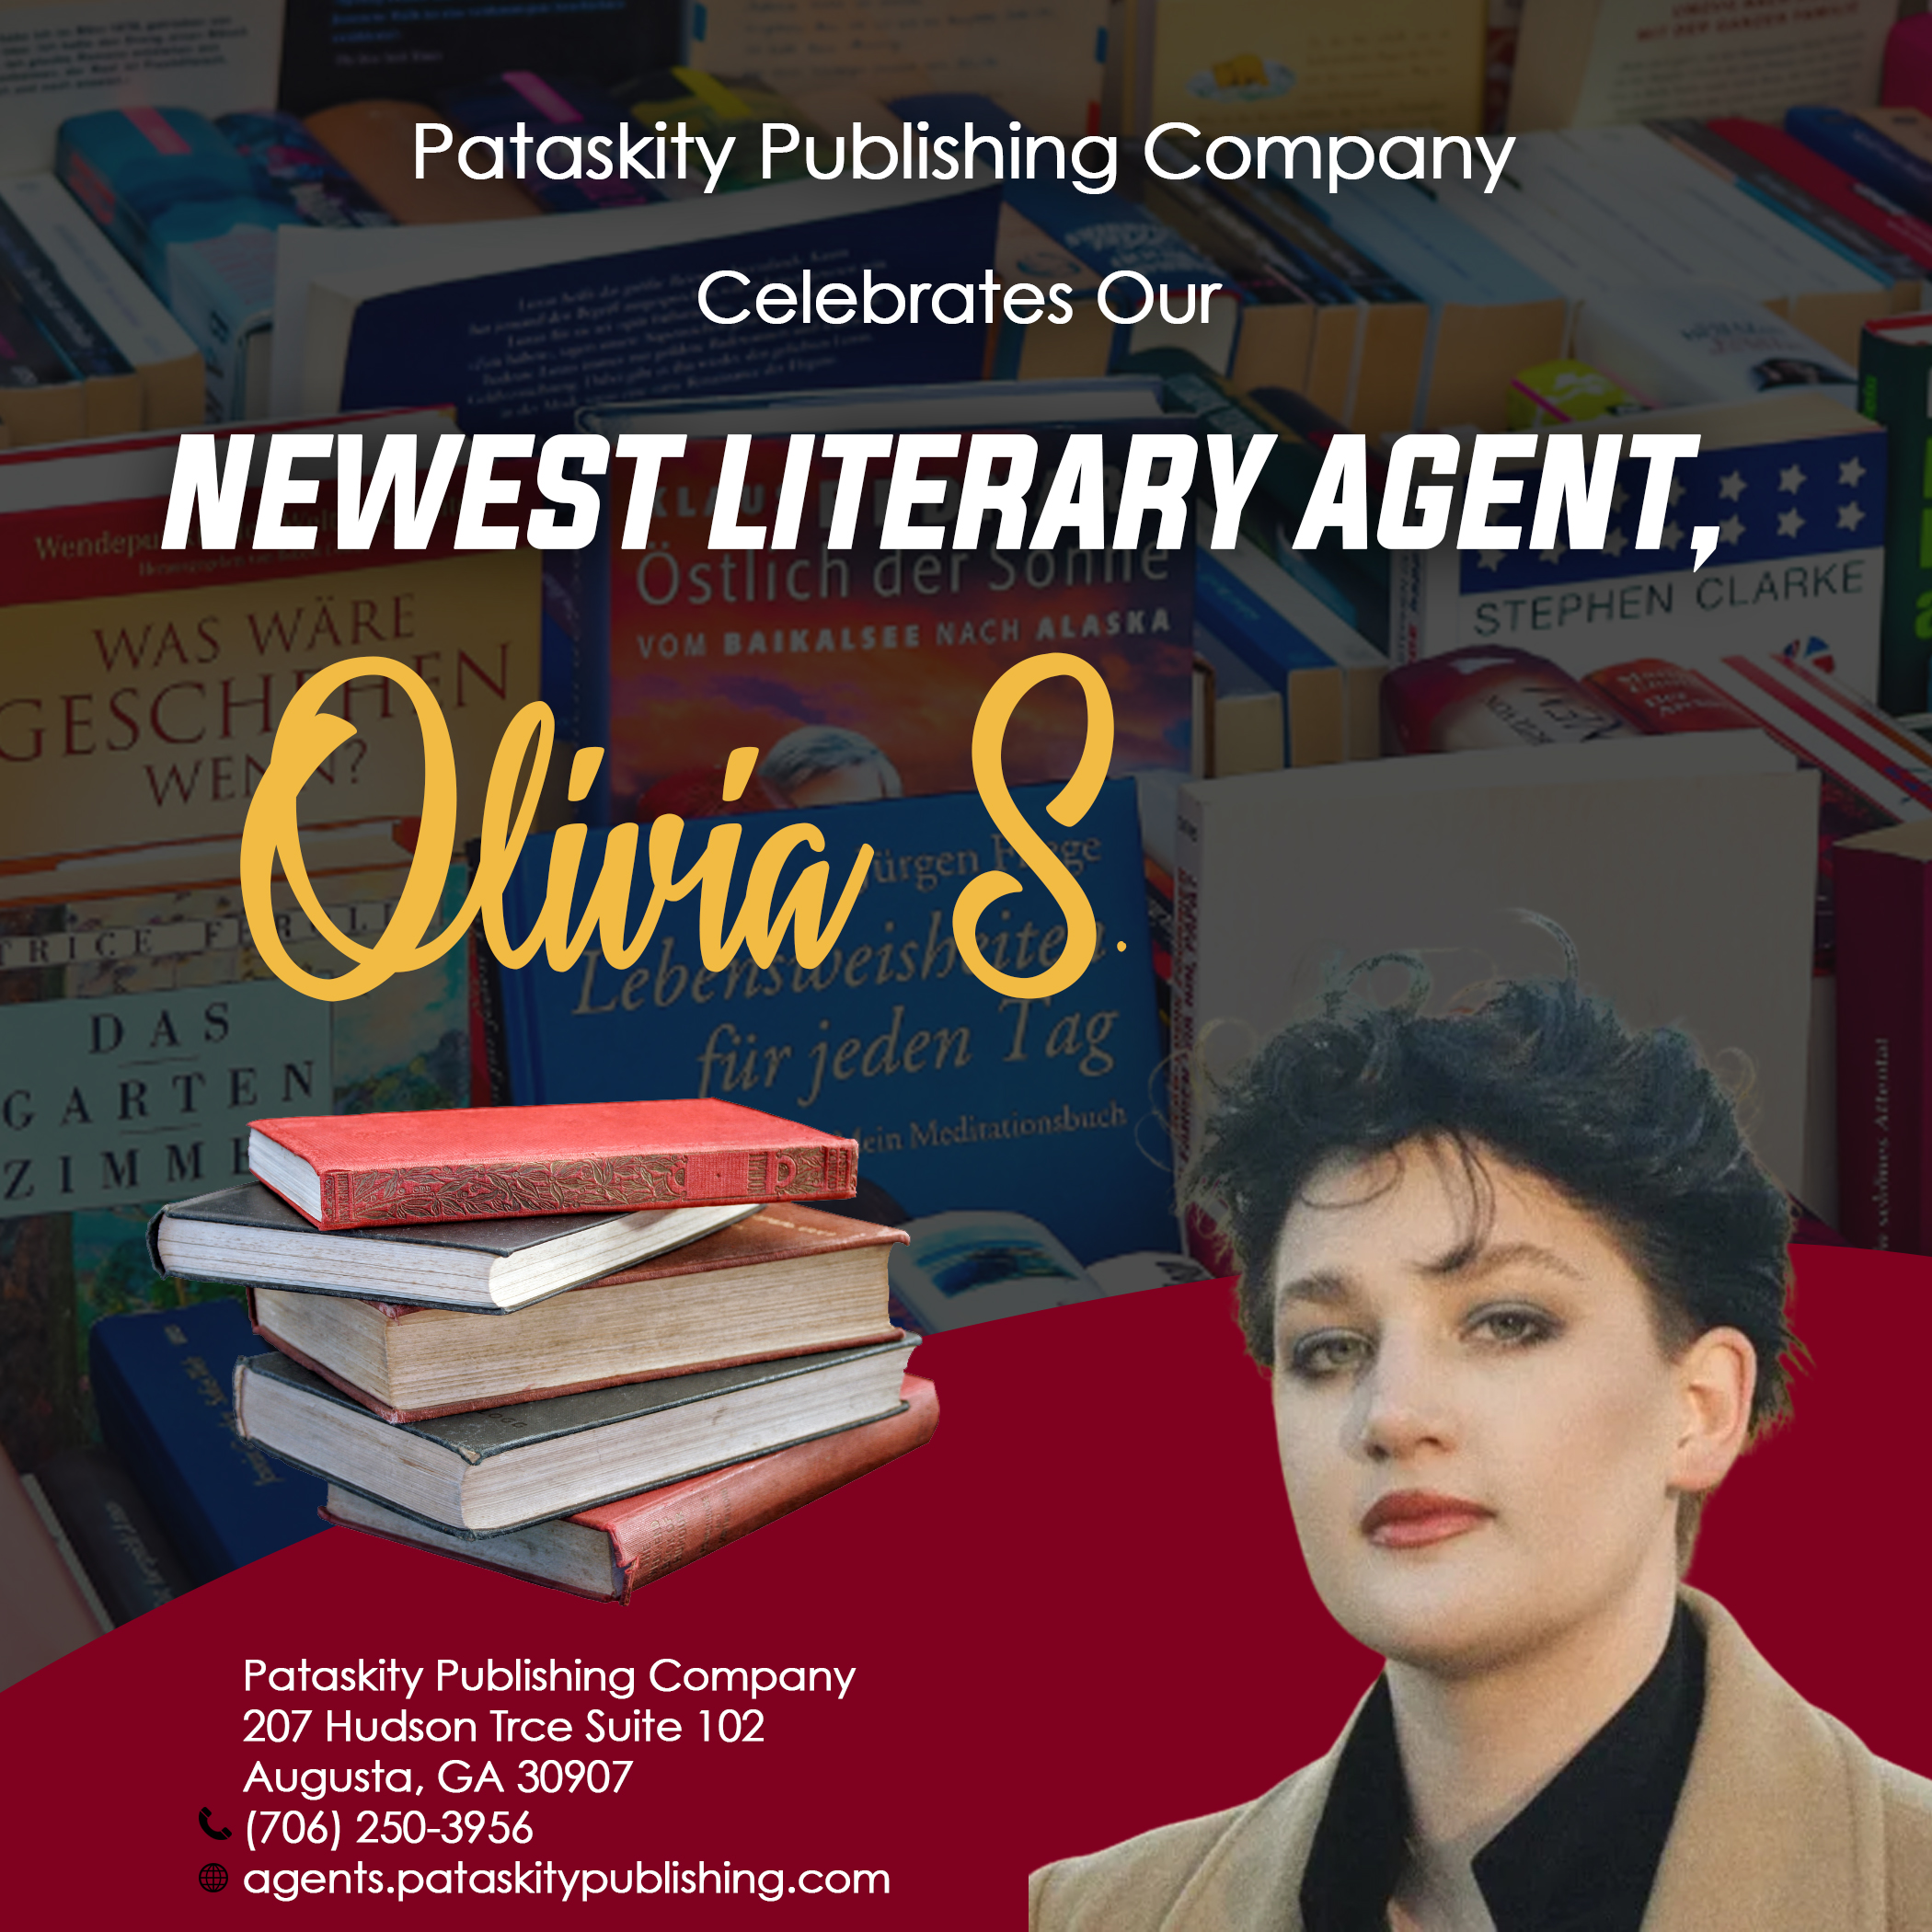 Pataskity Publishing Company welcomes Olivia S. to our team!